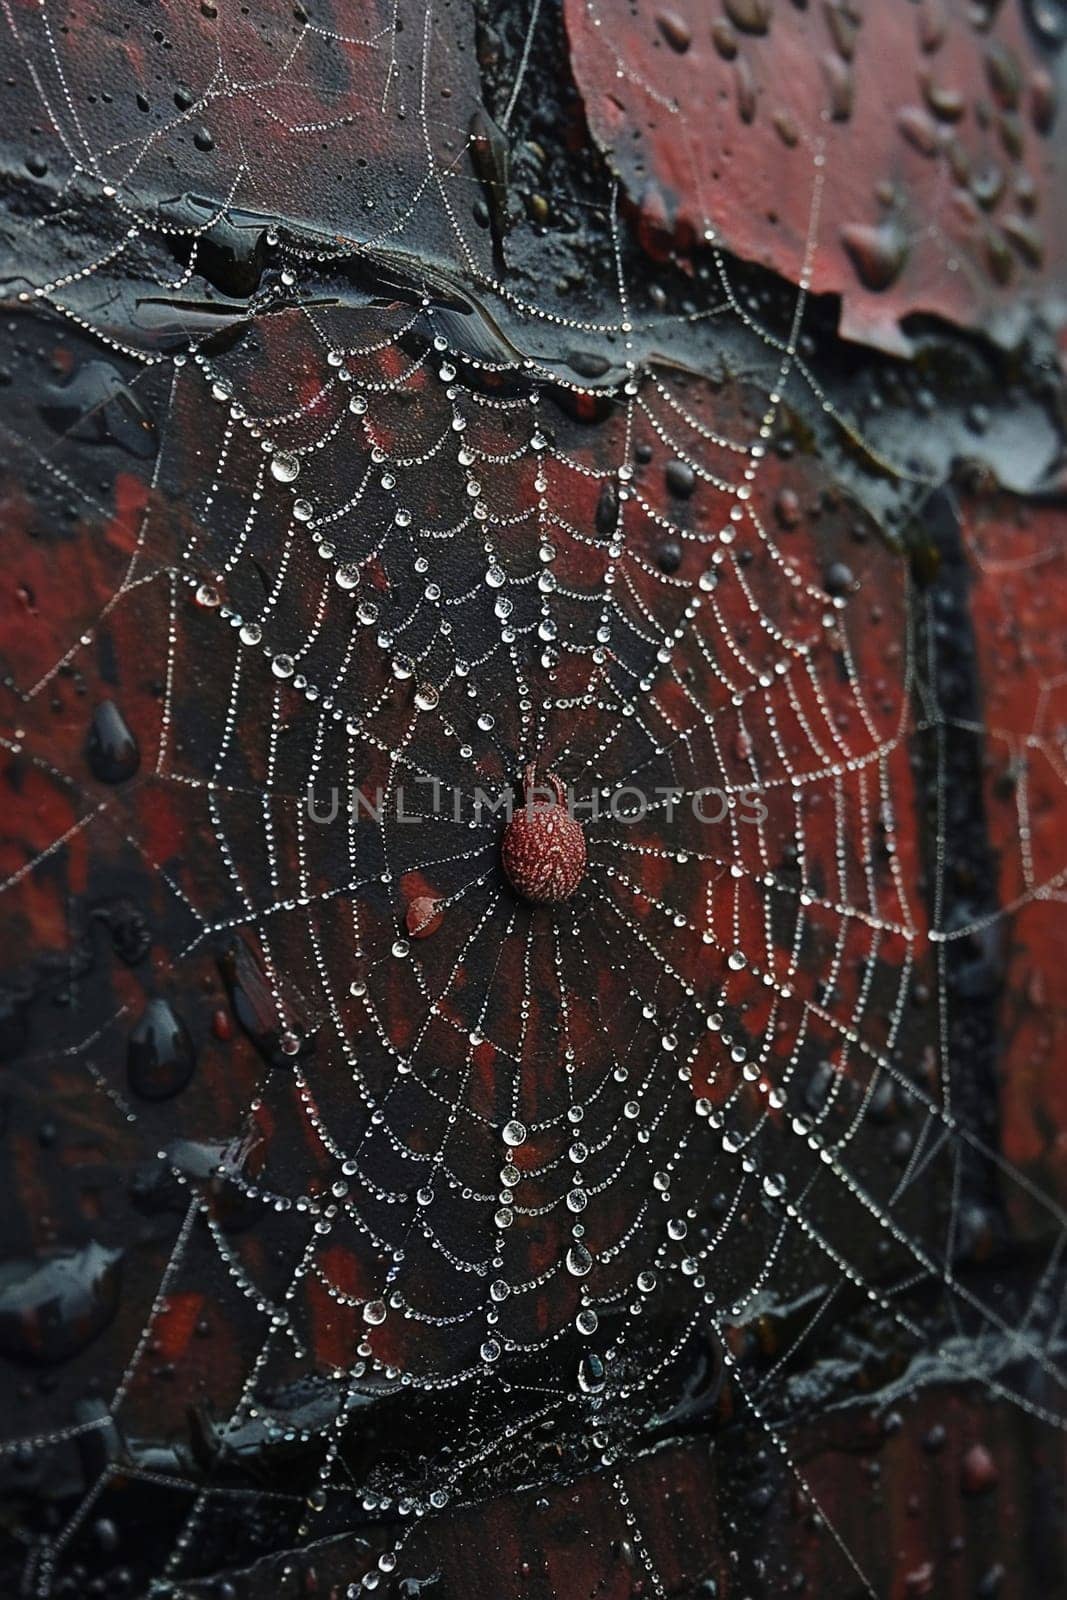 Glistening raindrops on a spider web capturing the intricacy and beauty of nature. Old brick wall with peeling paint by Benzoix